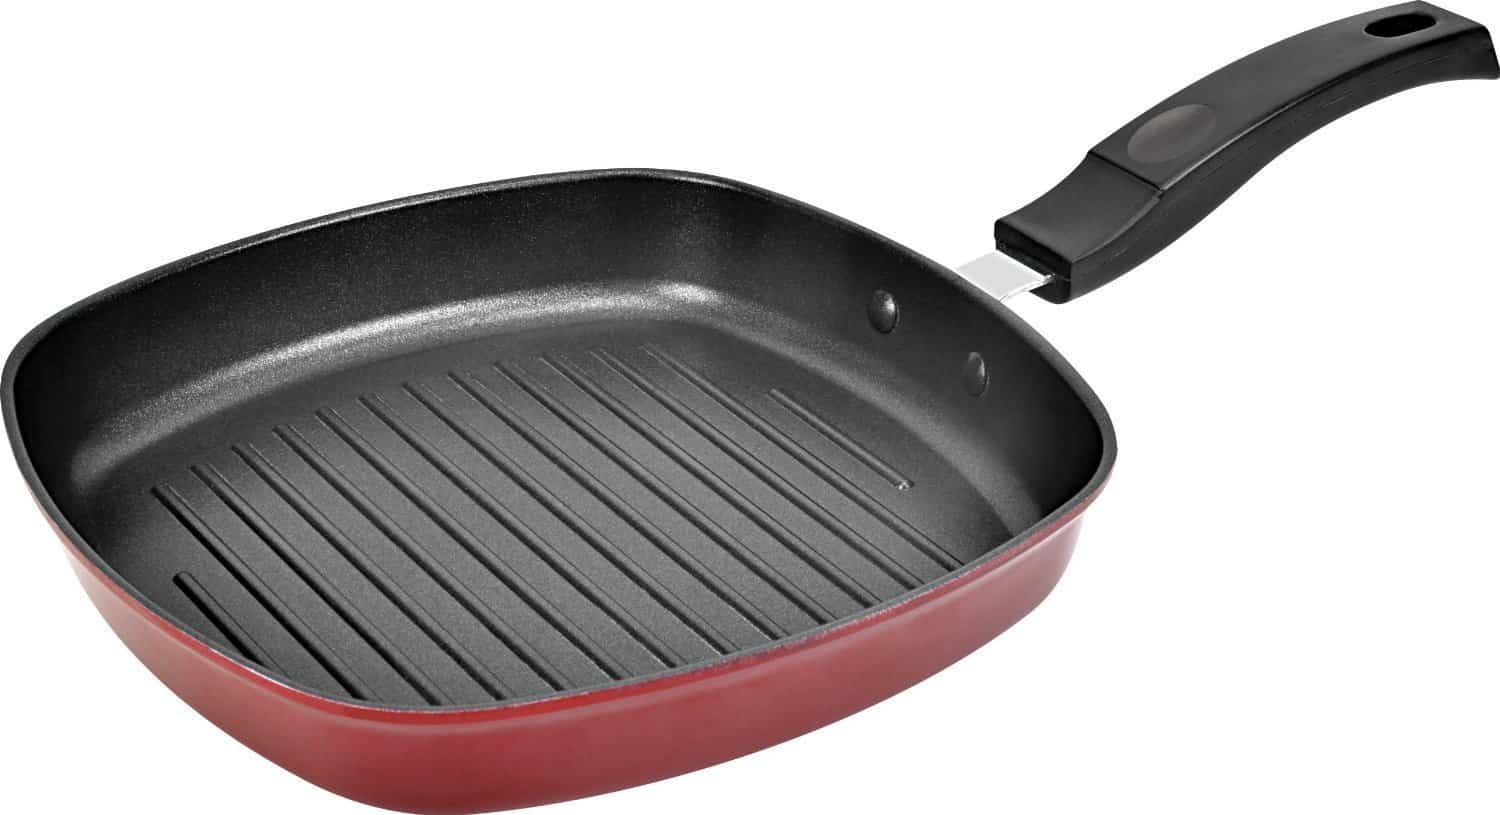 Tosaa Square Grill Pan Review - Best Frying Pan in India!